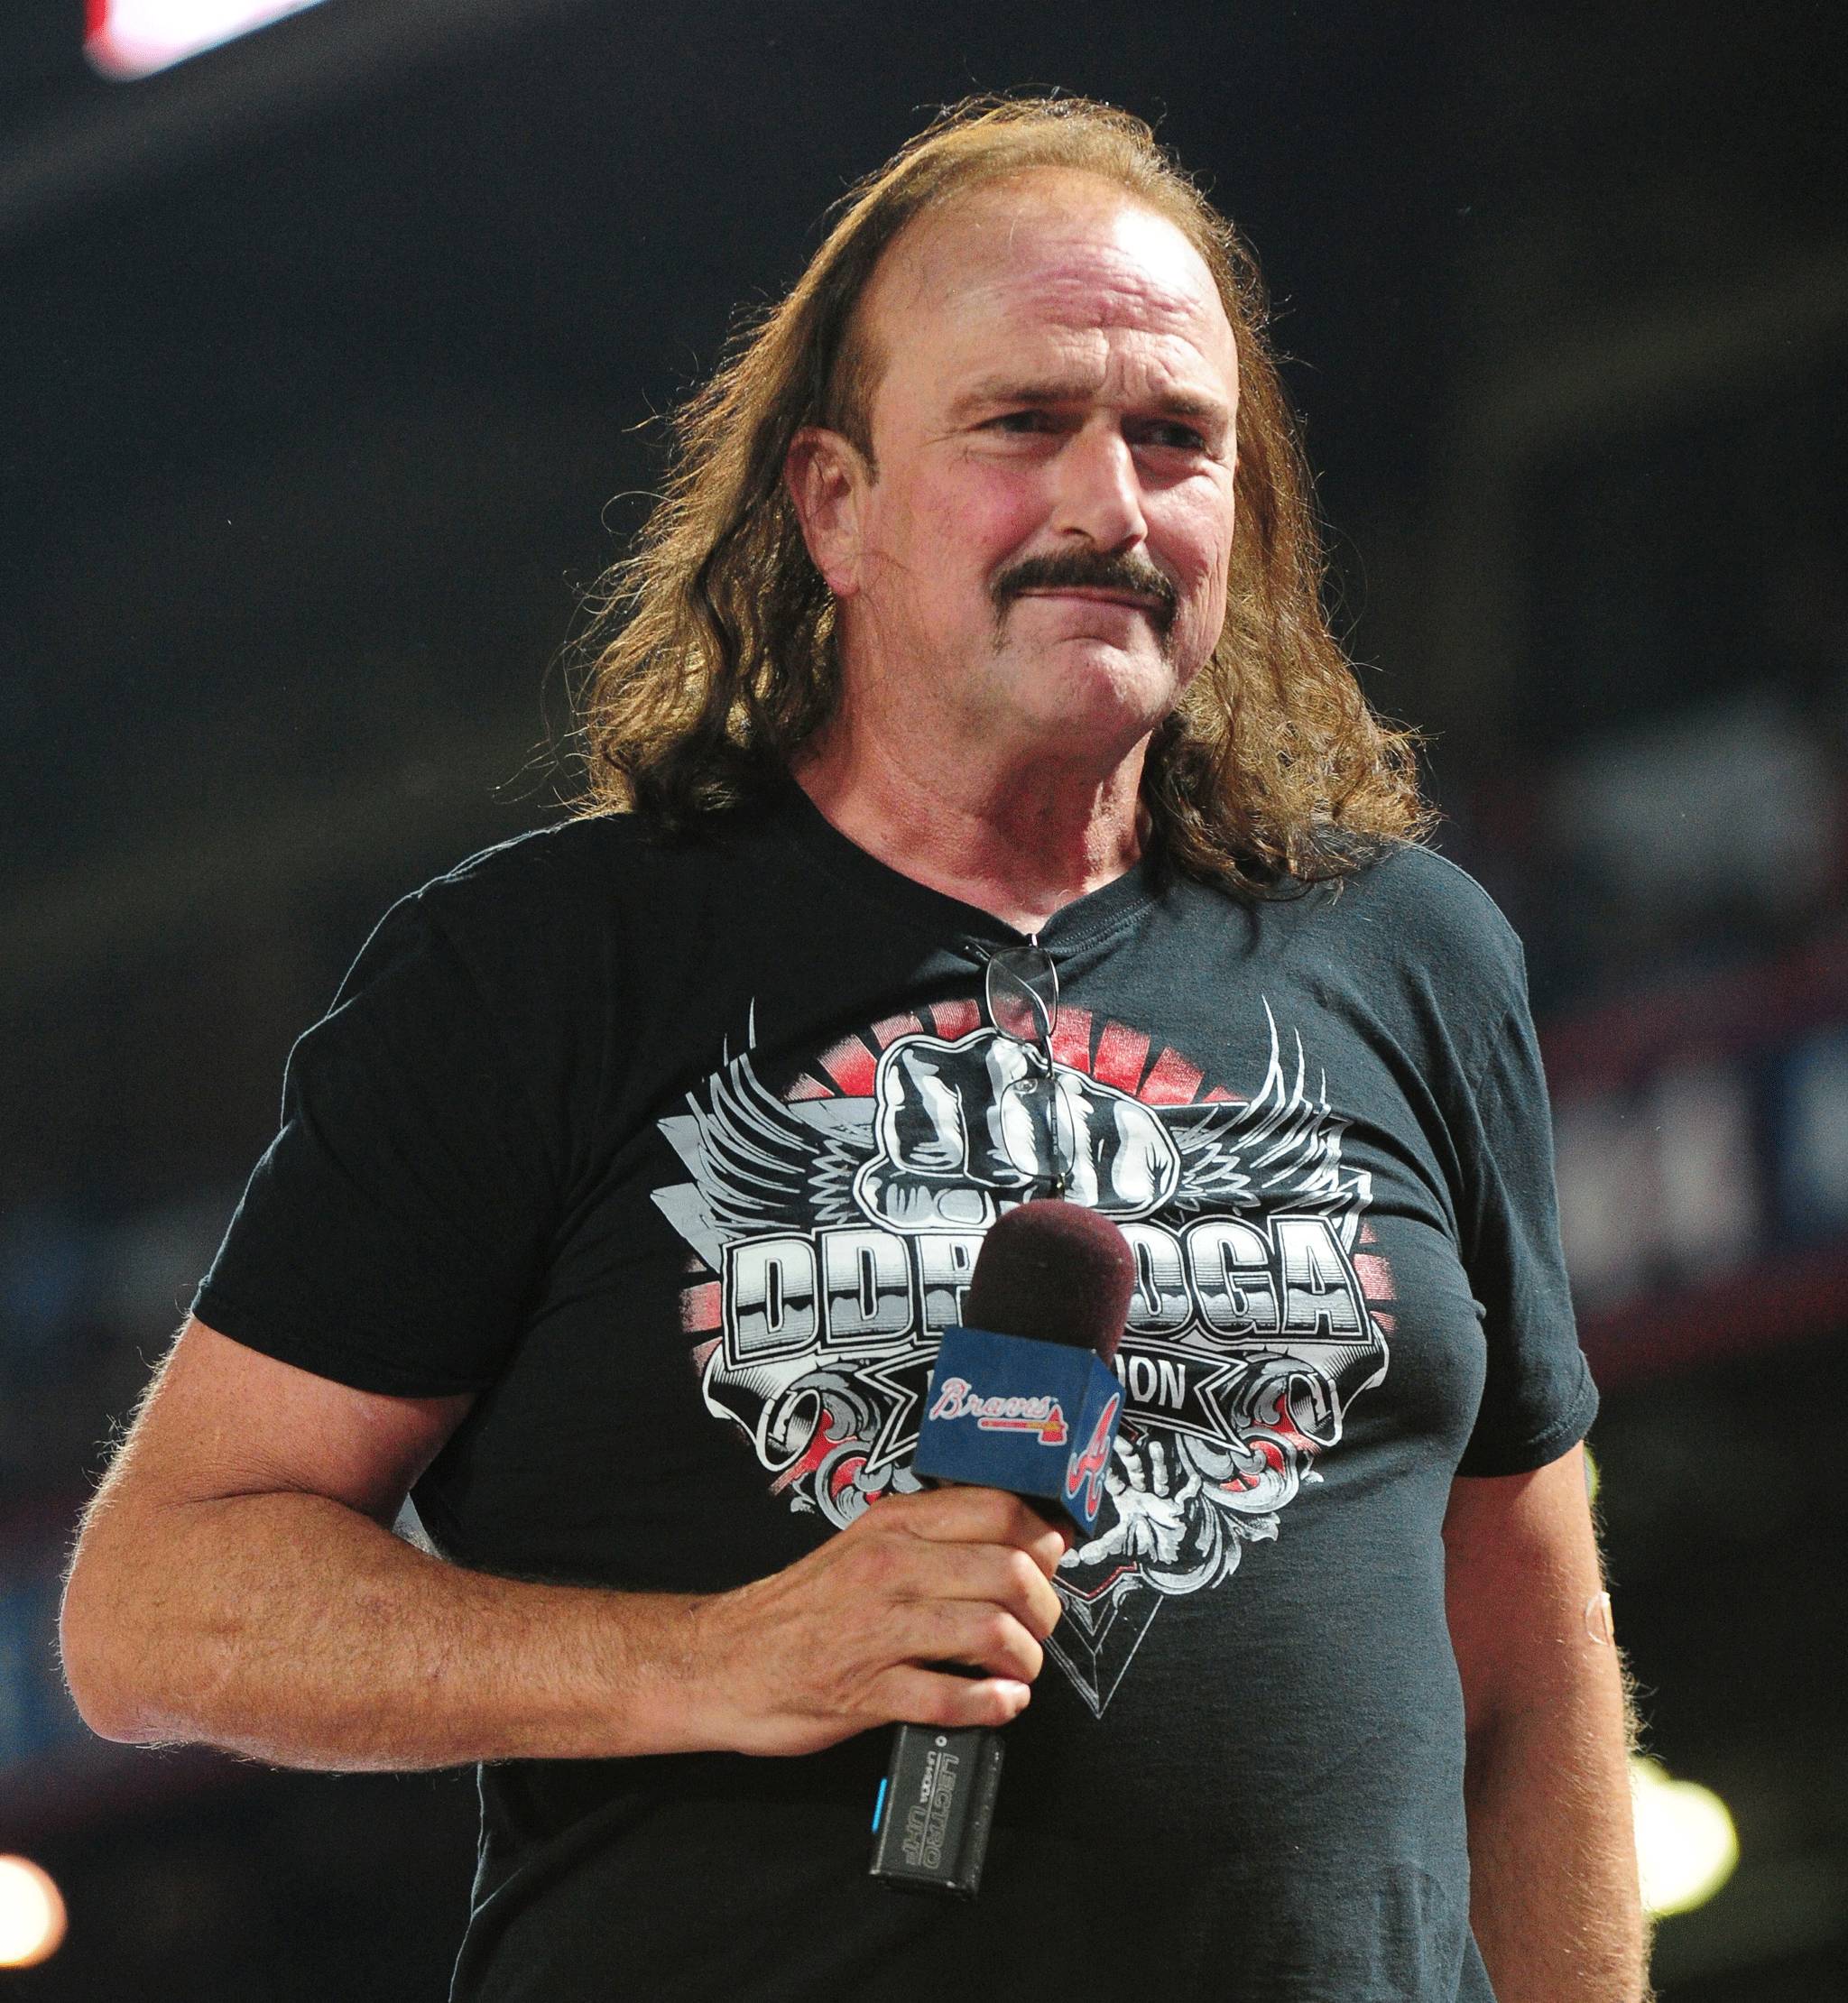 Jake 'The Snake' Roberts last performed in the WWE in 1997